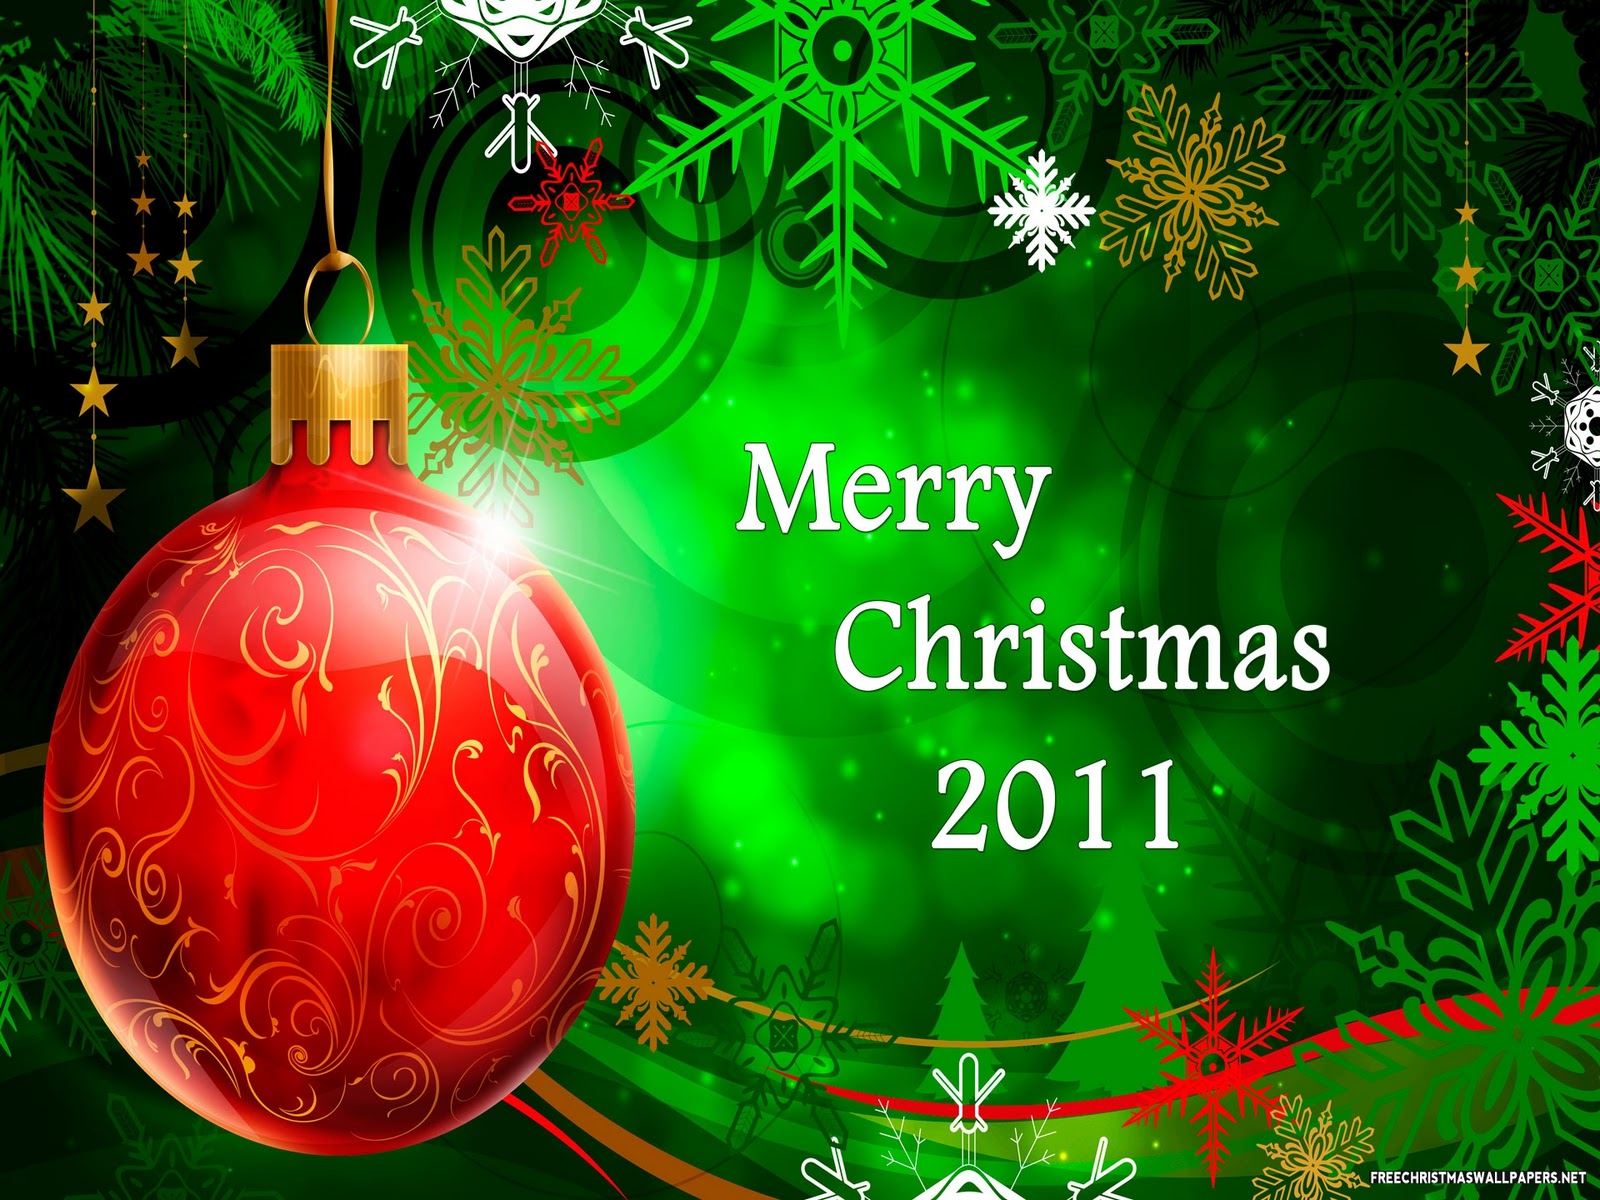 merry christmas 2011 and happy new year 2012